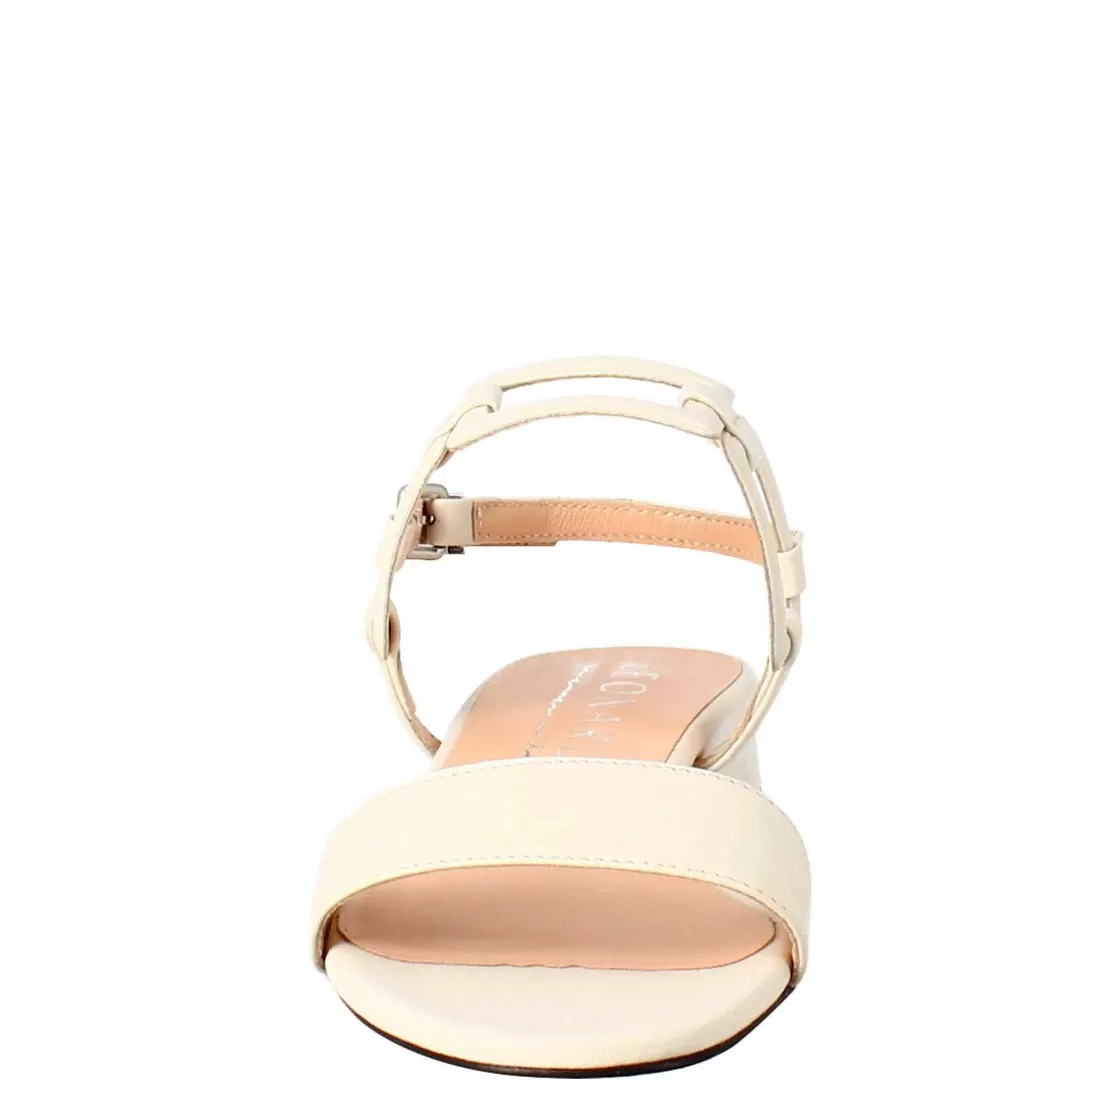 Leonardo Woman'S Open Sandal With Low Heel In Cream Leather Outlet